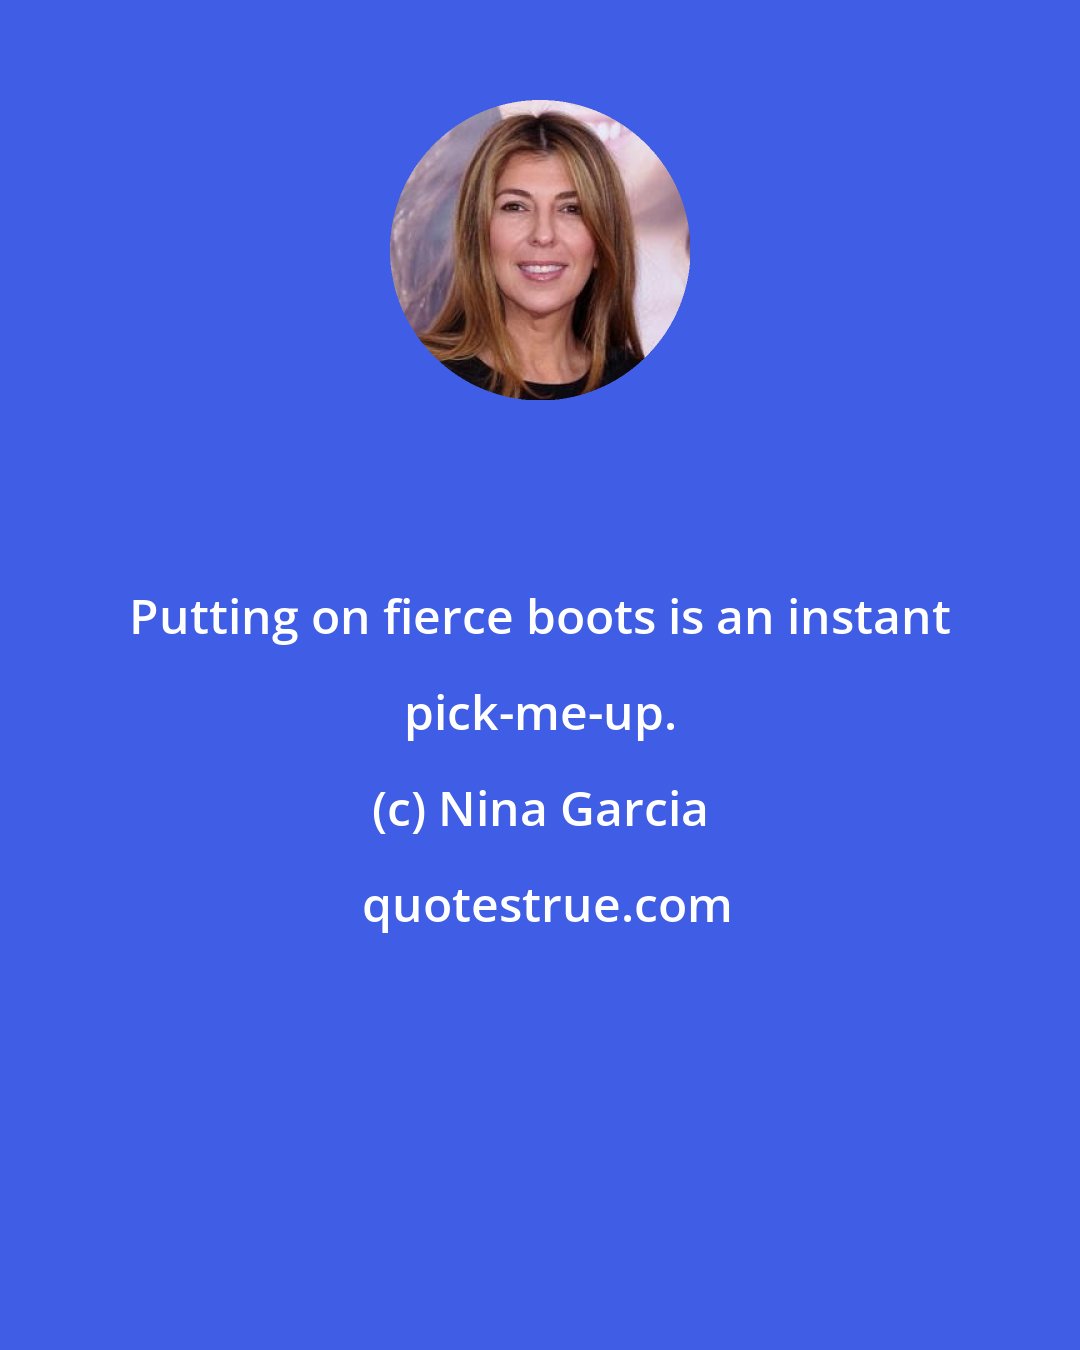 Nina Garcia: Putting on fierce boots is an instant pick-me-up.